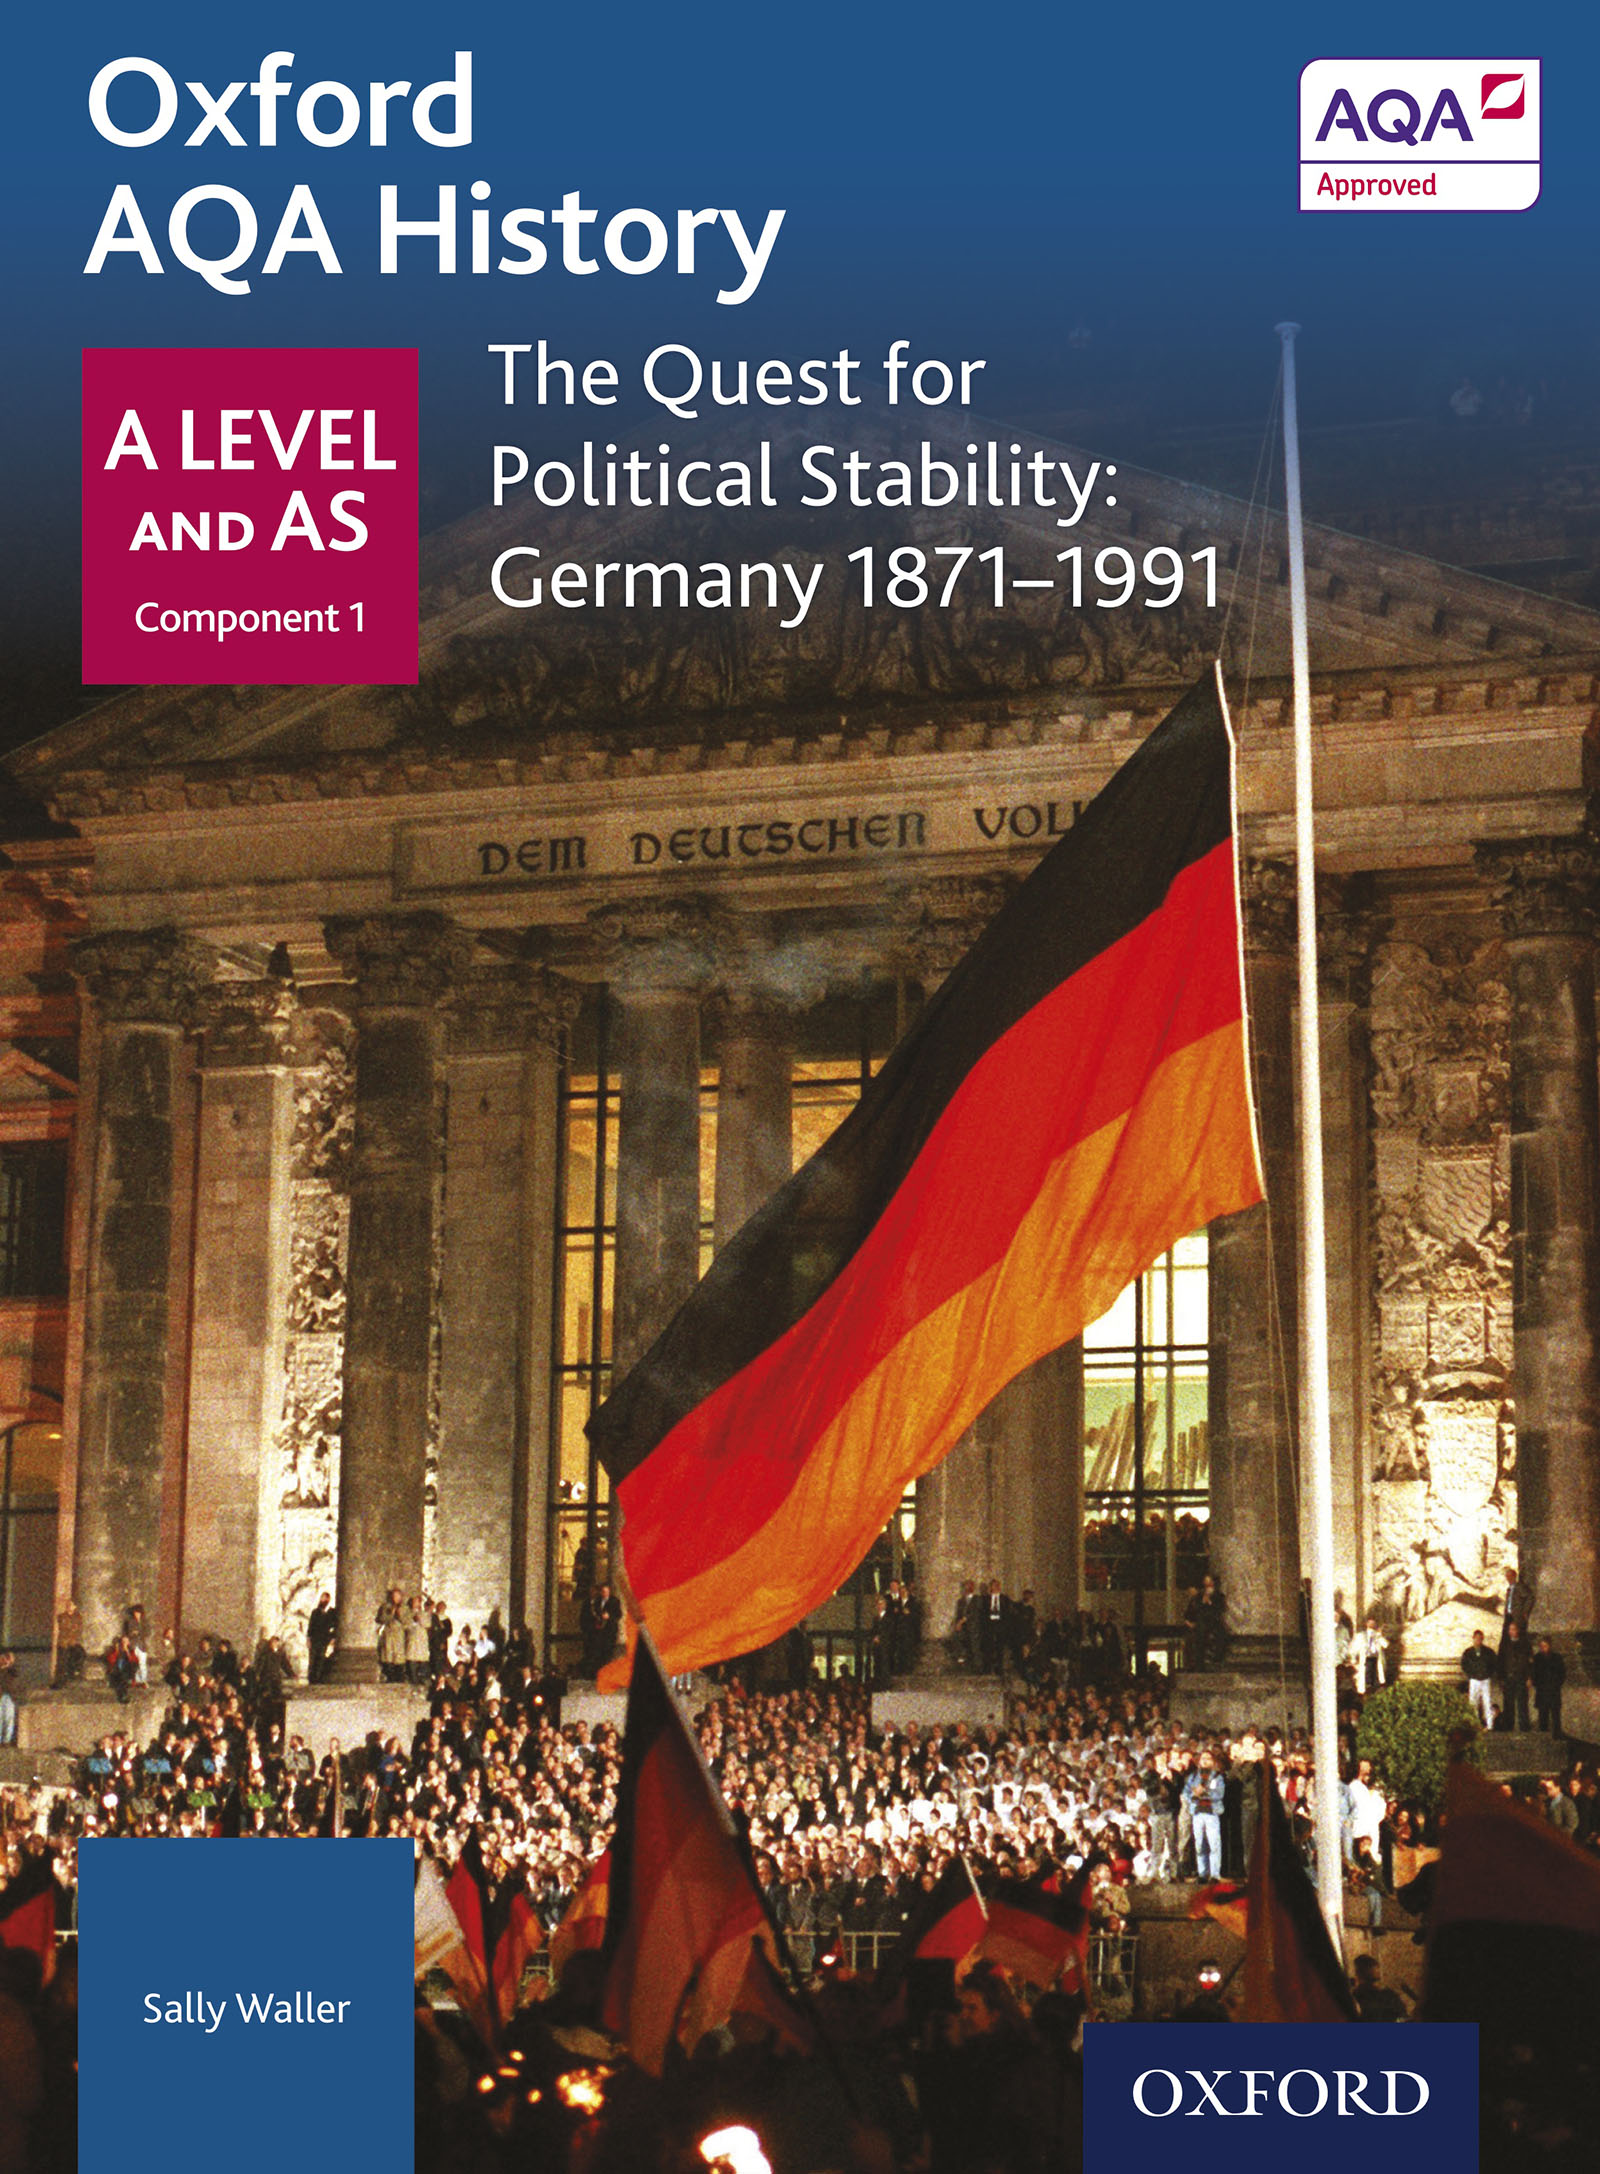 Oxford AQA History: A Level and AS Component 1: The Quest for Political Stability: Germany 1871-1990